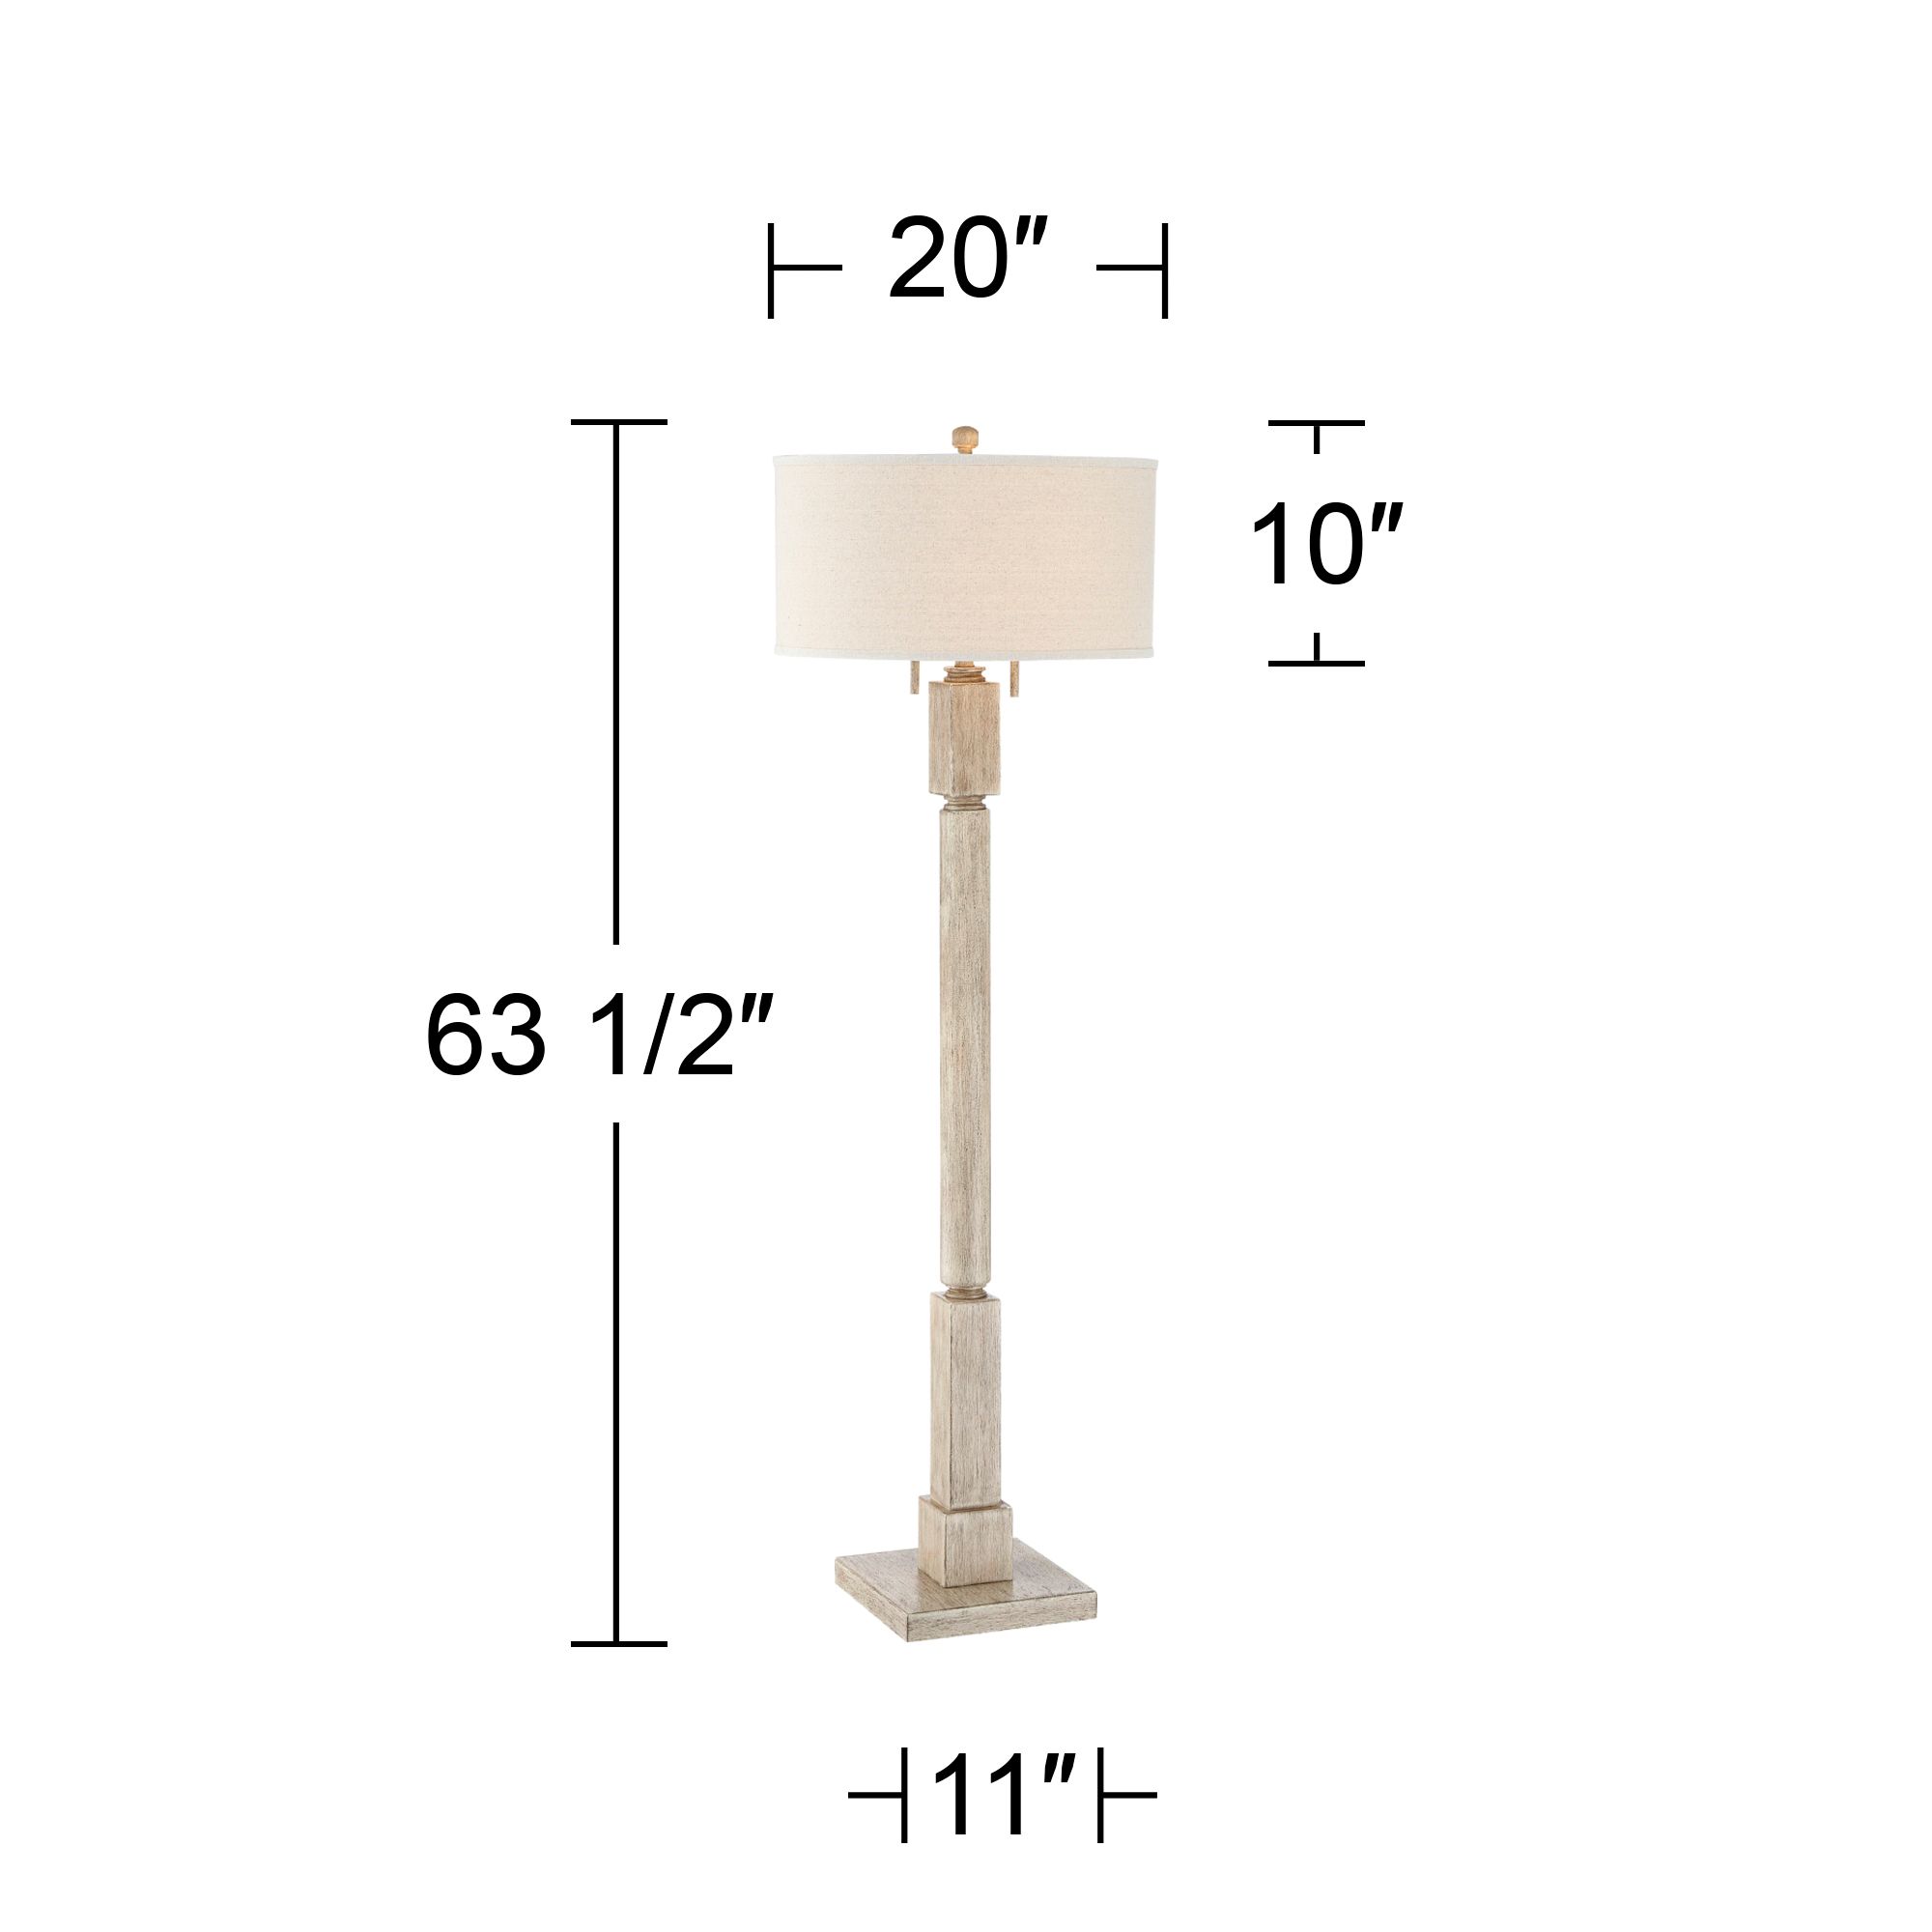 Barnes and Ivy Baluster Country Cottage Floor Lamp 63 1/2" Tall Pickled Wood Oatmeal Linen Drum Shade for Living Room Reading Bedroom Office House - image 4 of 10